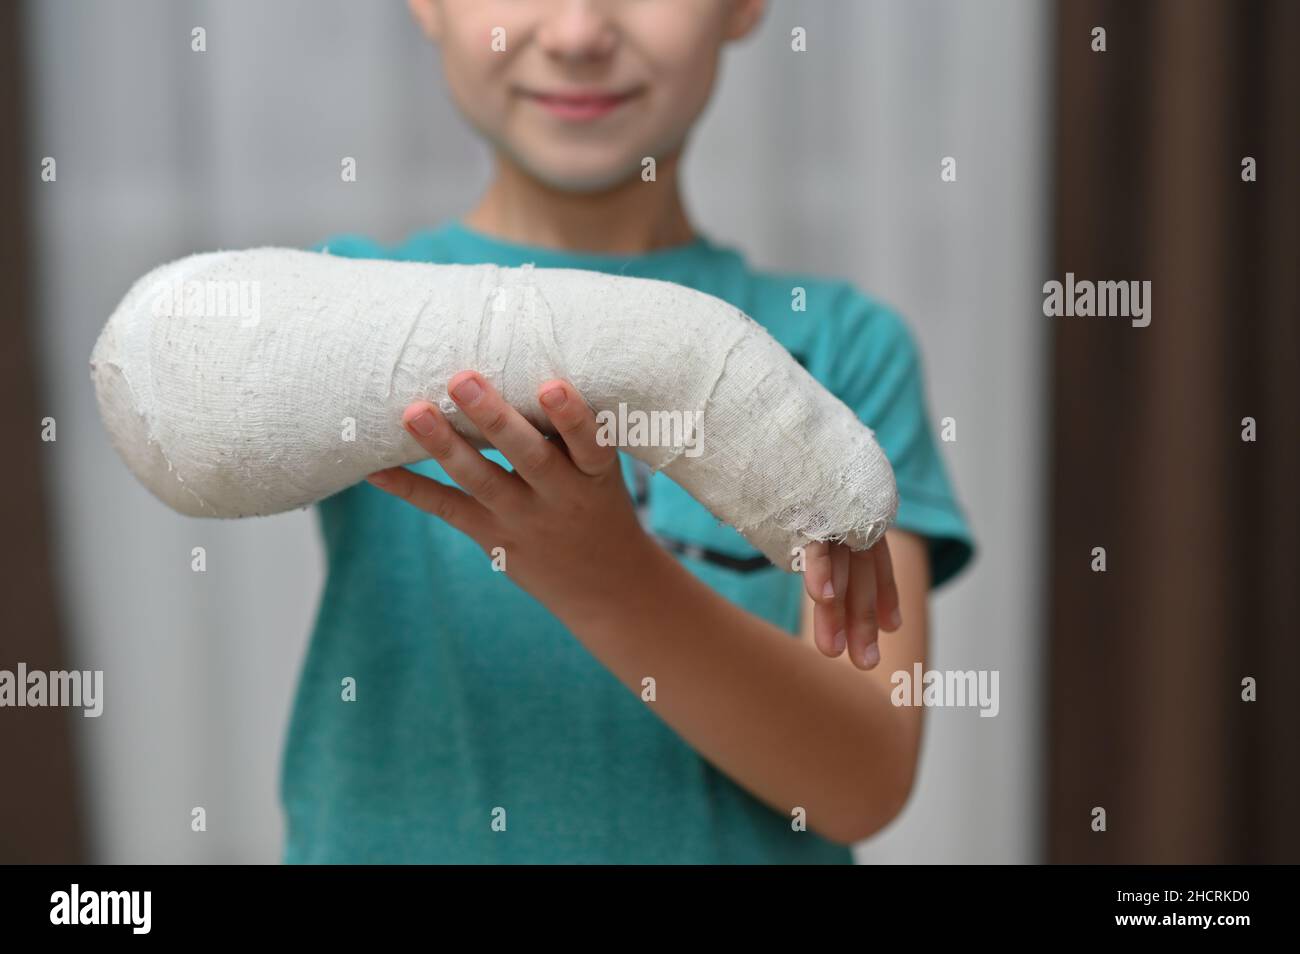 a boy with a broken arm in a cast. close-up. Stock Photo